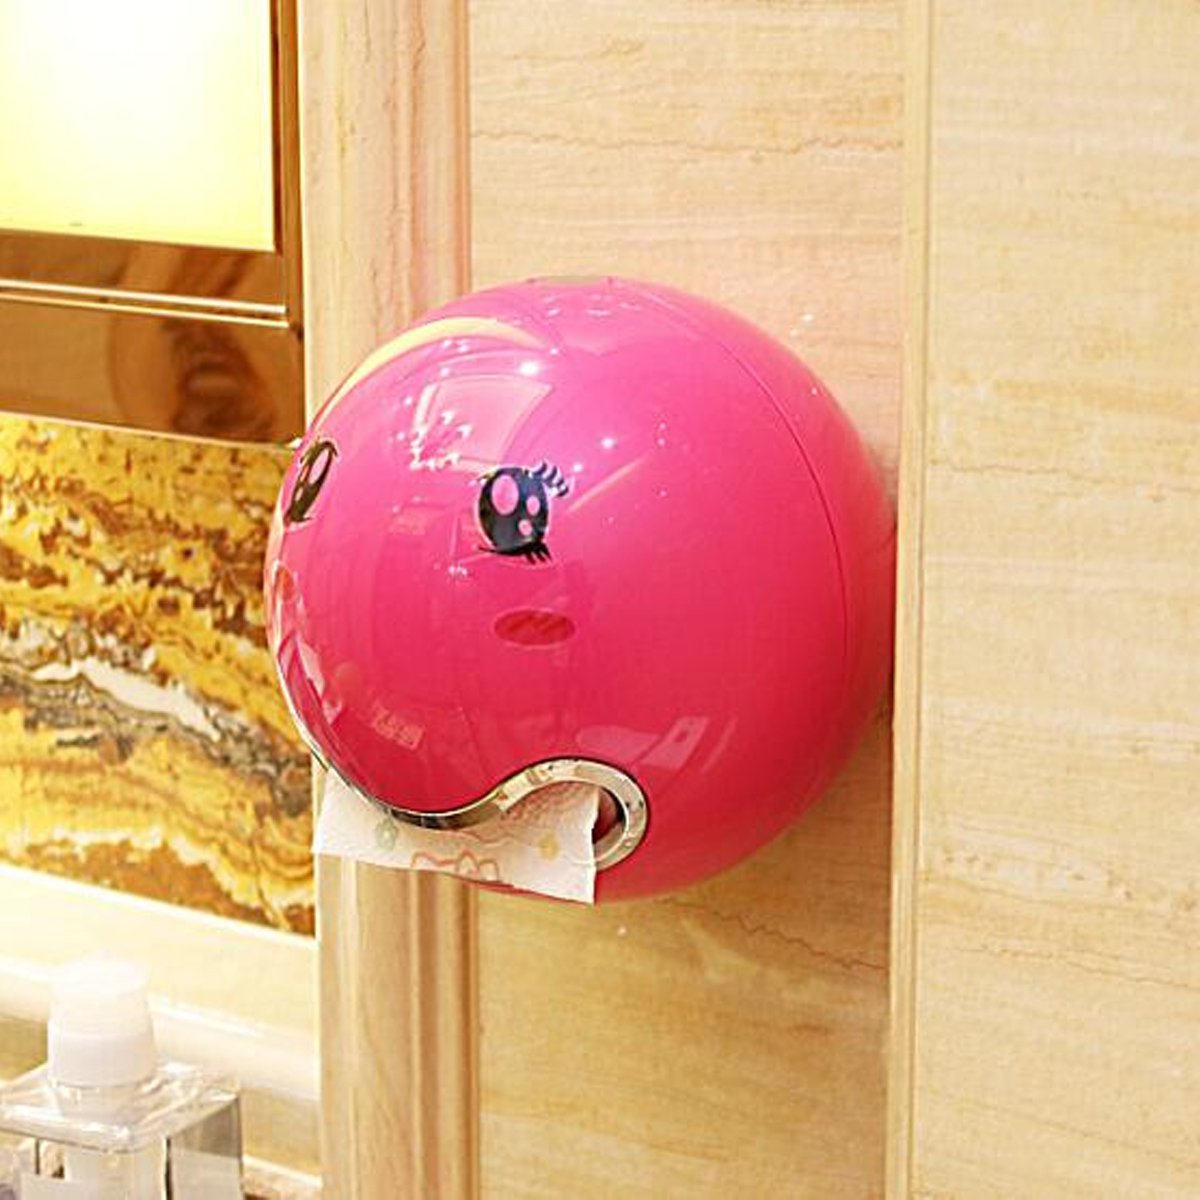 Bathroom-Ball-Shaped-Face-Wall-Mounted-Tissue-Holder-Toilet-Roll-Paper-Box-Paper-Shelf-Holder-1634911-5